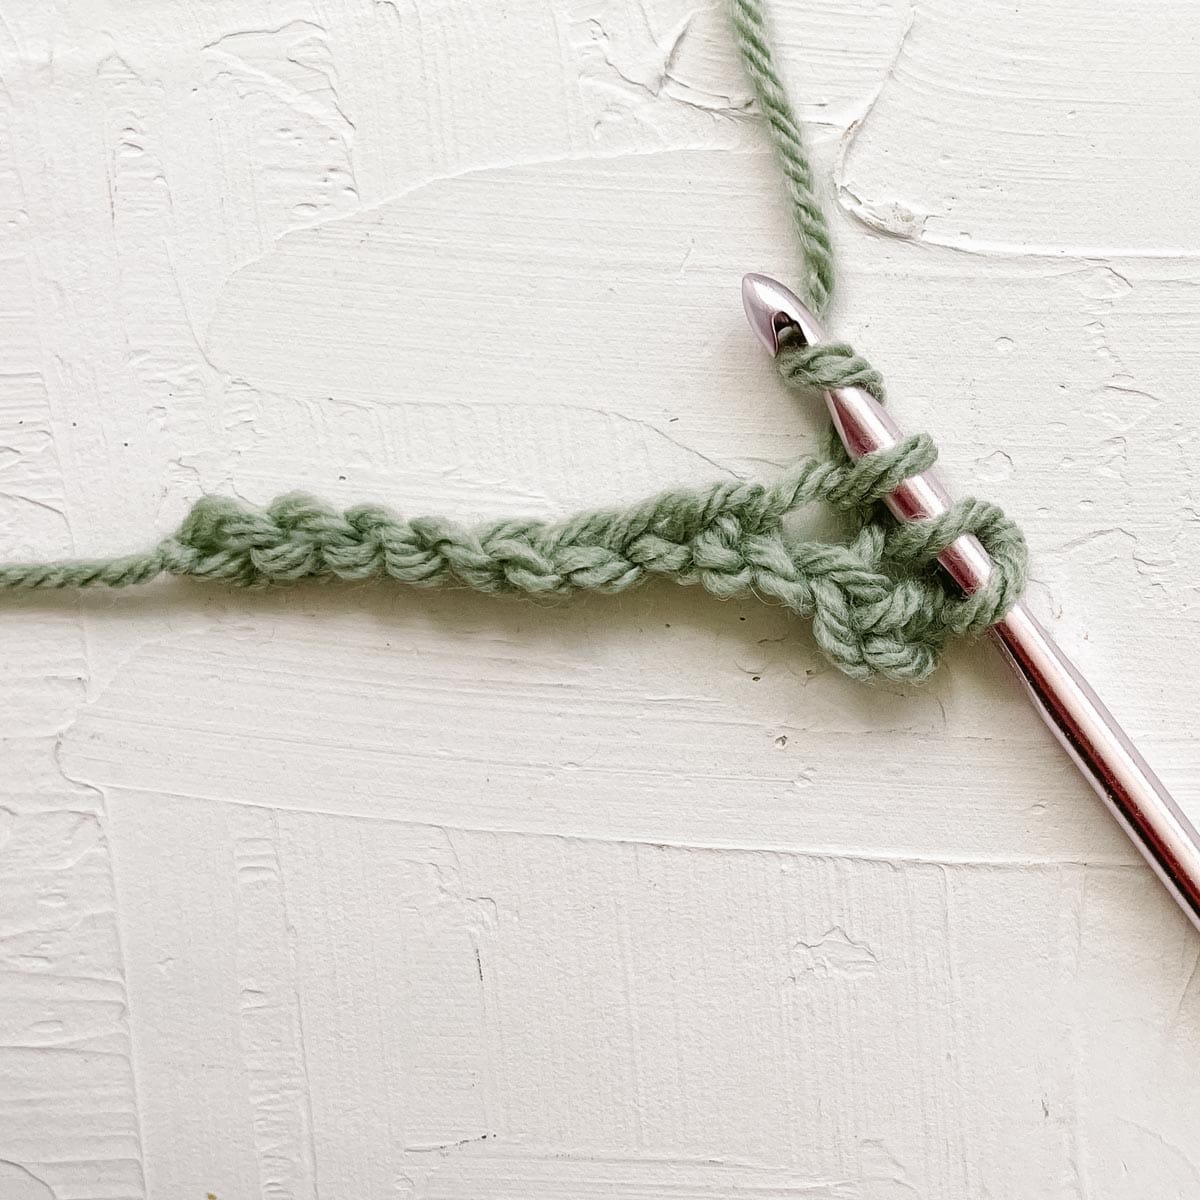 Double crochet step 2: Yarn over and pull up a loop.